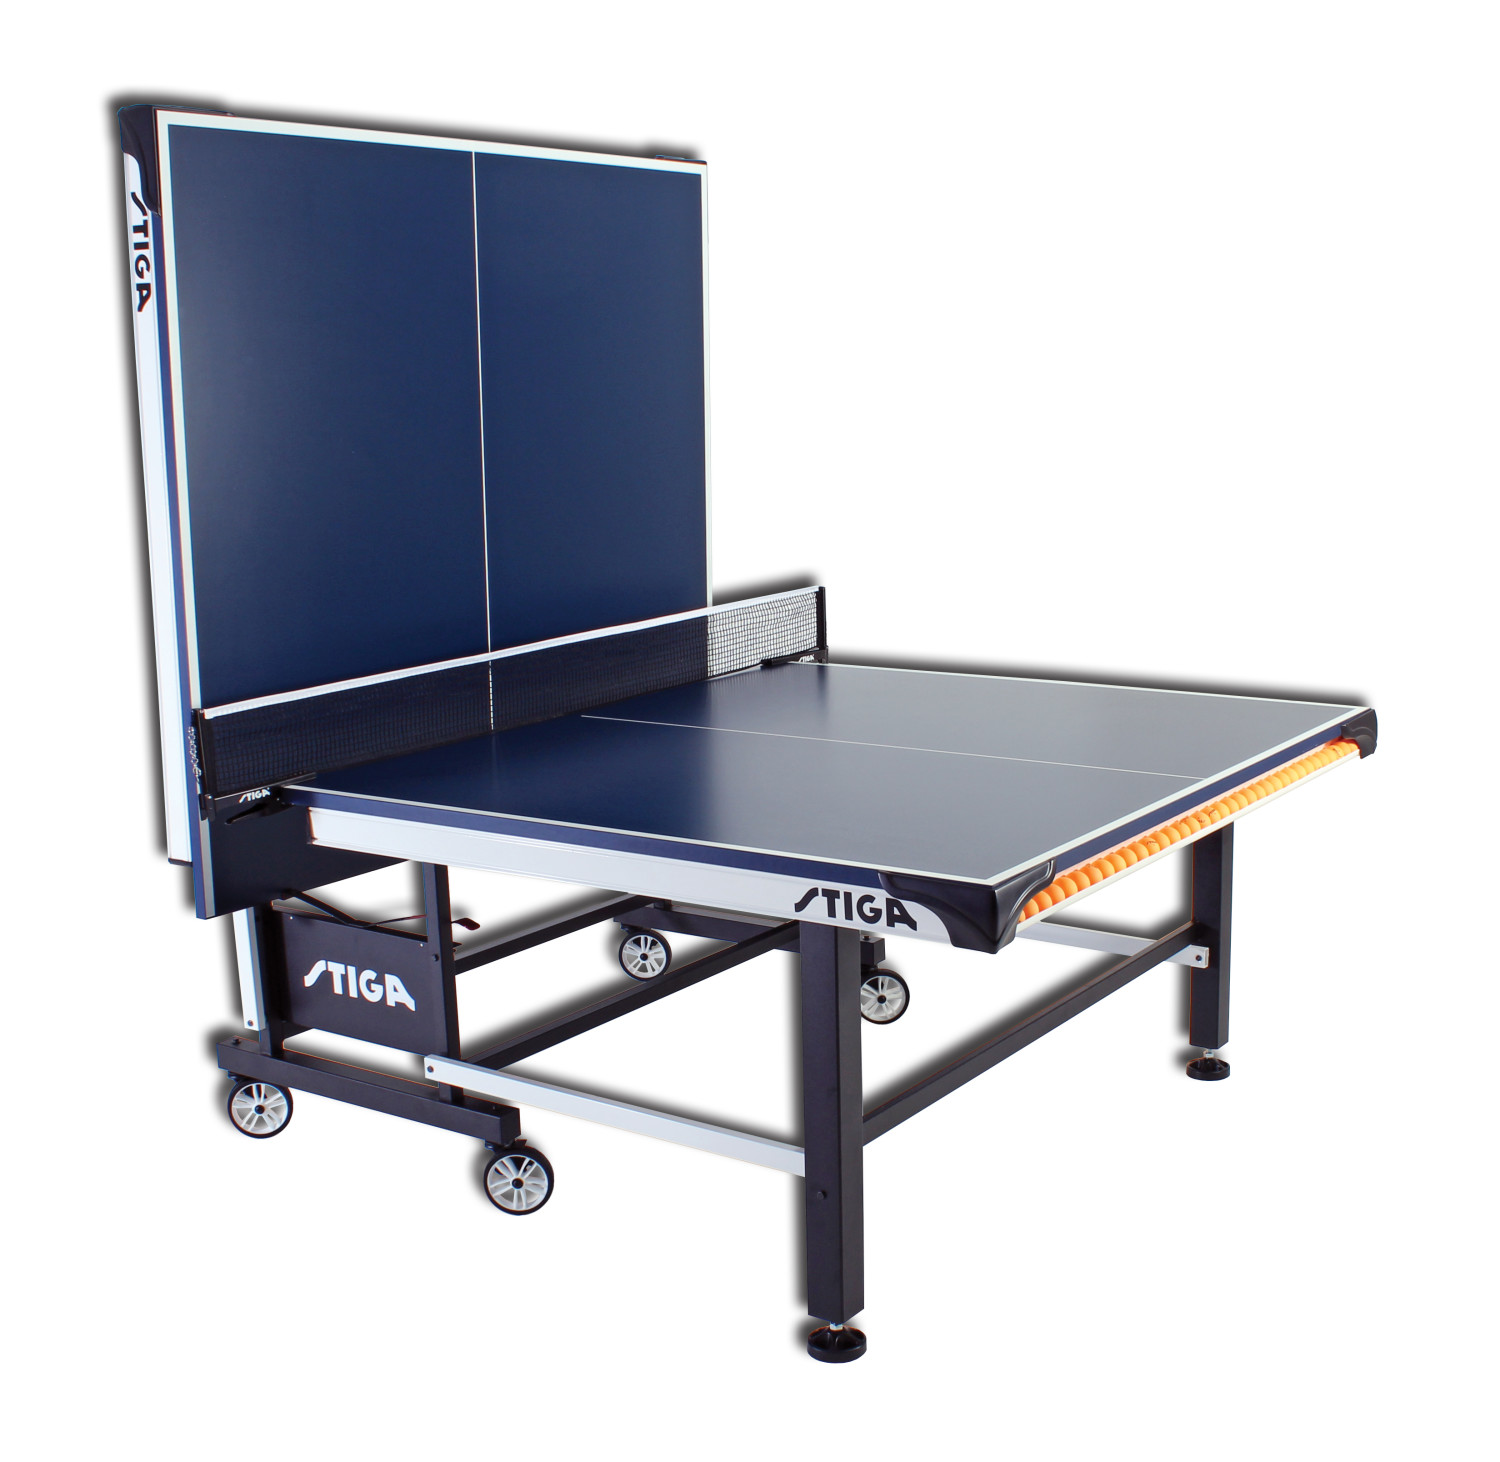 STIGA Tournament Series 520 Tournament-Grade Indoor Table Tennis Table with Premium Clipper Net and Post Included - image 3 of 19